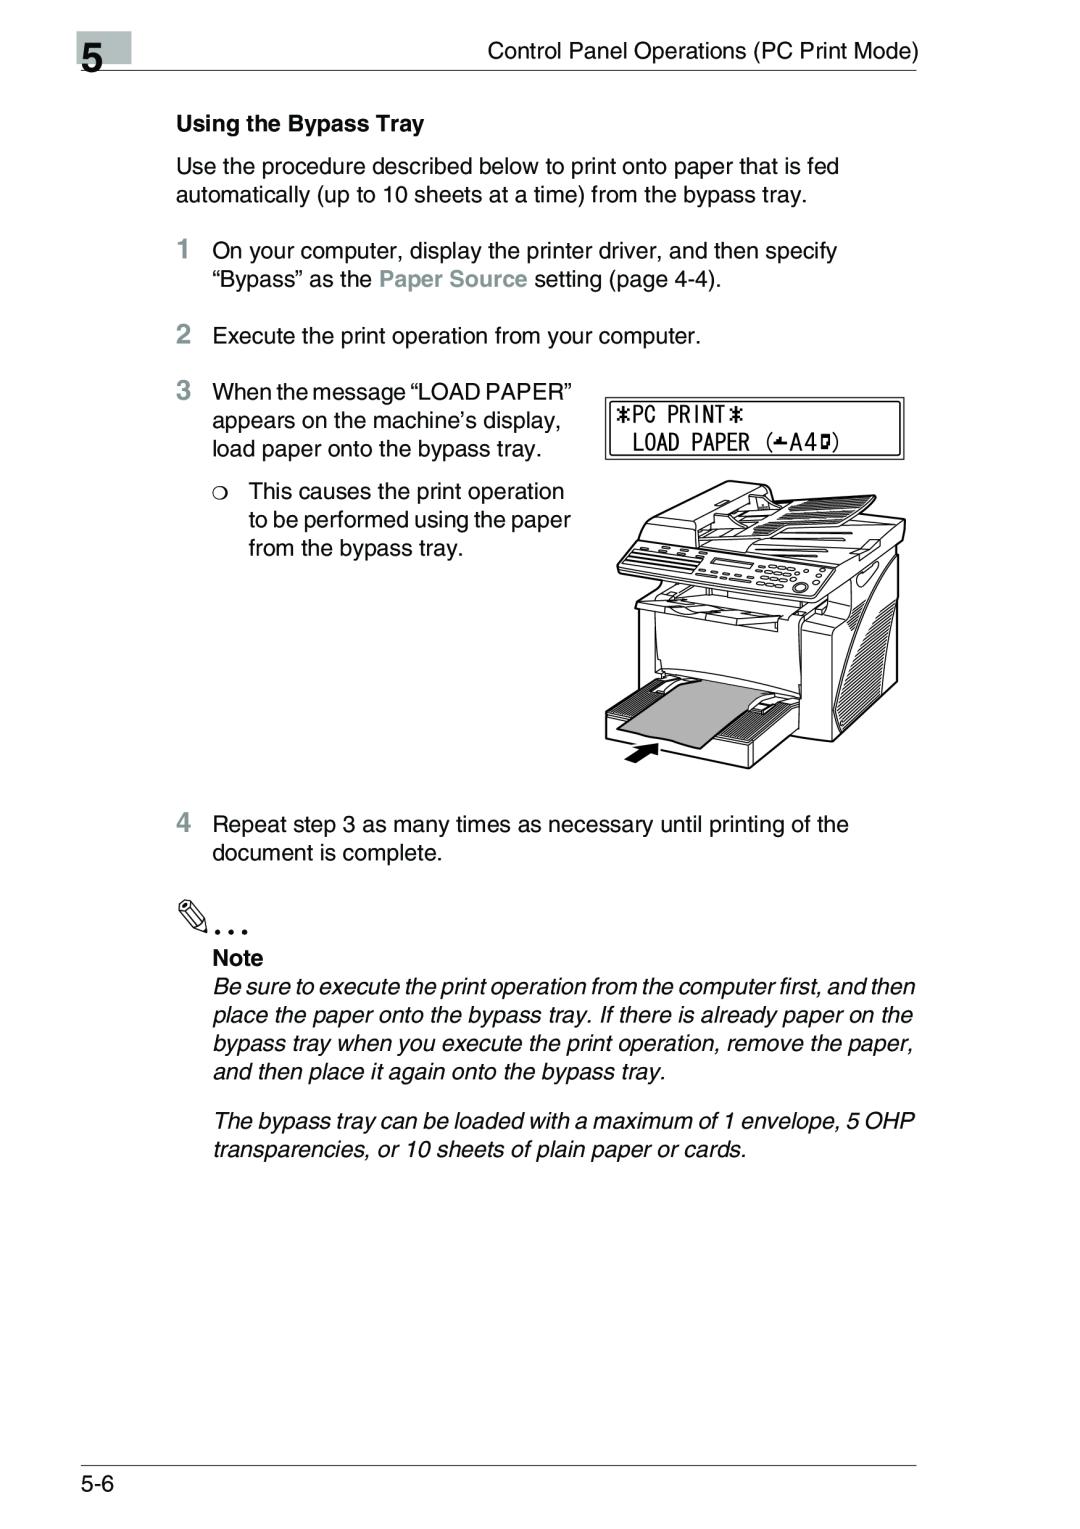 Konica Minolta FAX2900/FAX3900 Using the Bypass Tray, appears on the machine’s display, load paper onto the bypass tray 